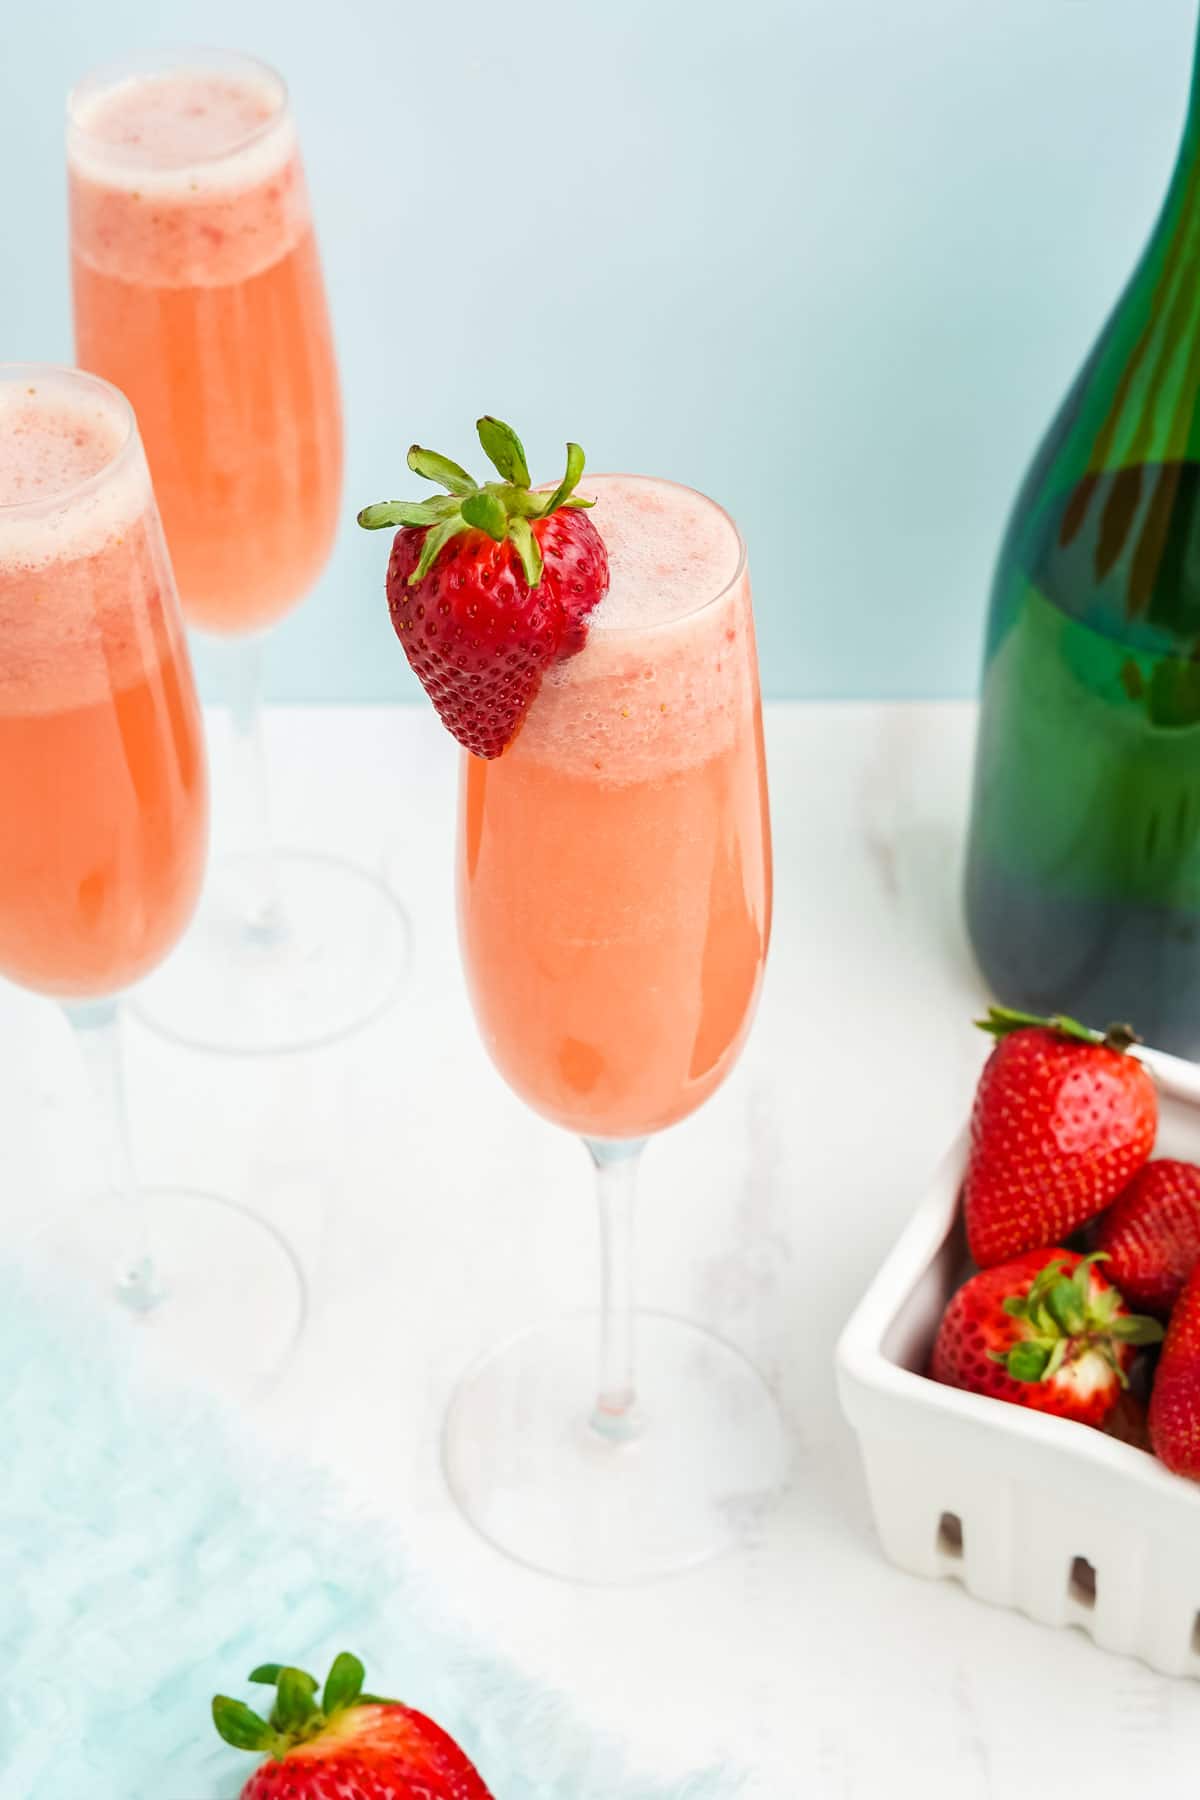 Closeup of glass of strawberry mimosa with a strawberry on the rim.